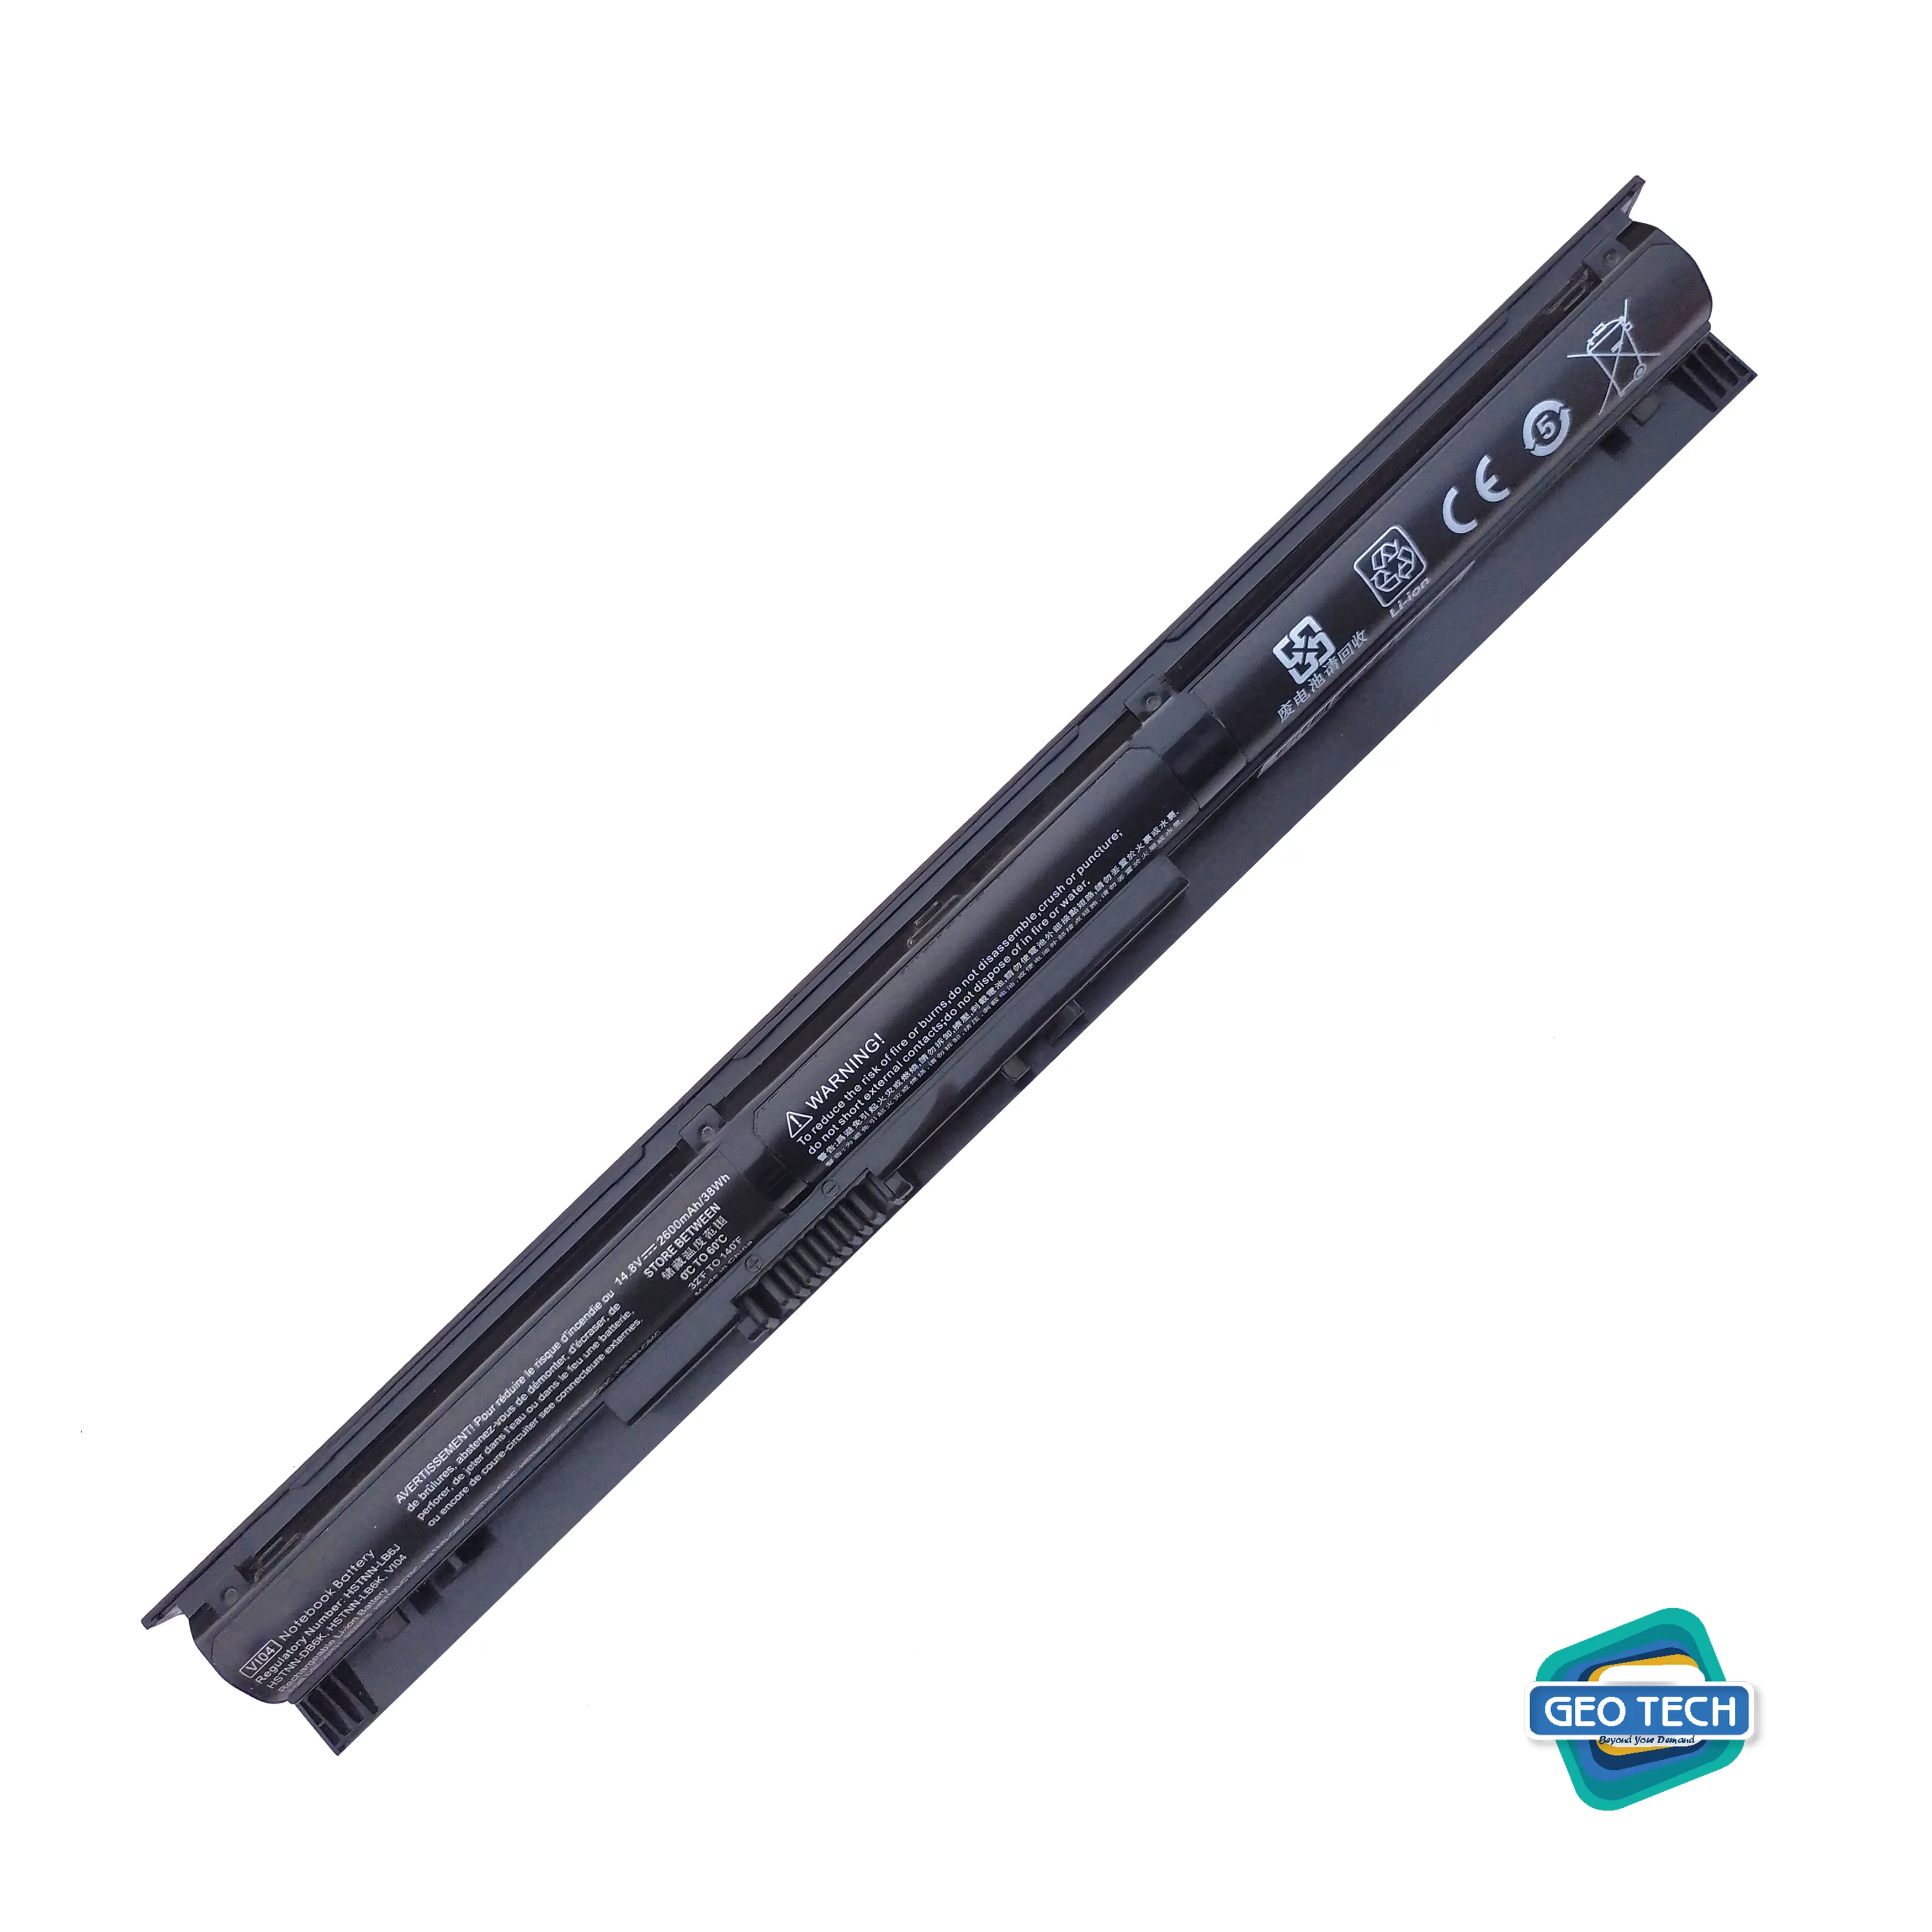 LAPTOP BATTERY FOR HP VI04/ laptop battery for HP ENVY 14 15 17 SERIES AND PAVILION 15 17 SERIES.